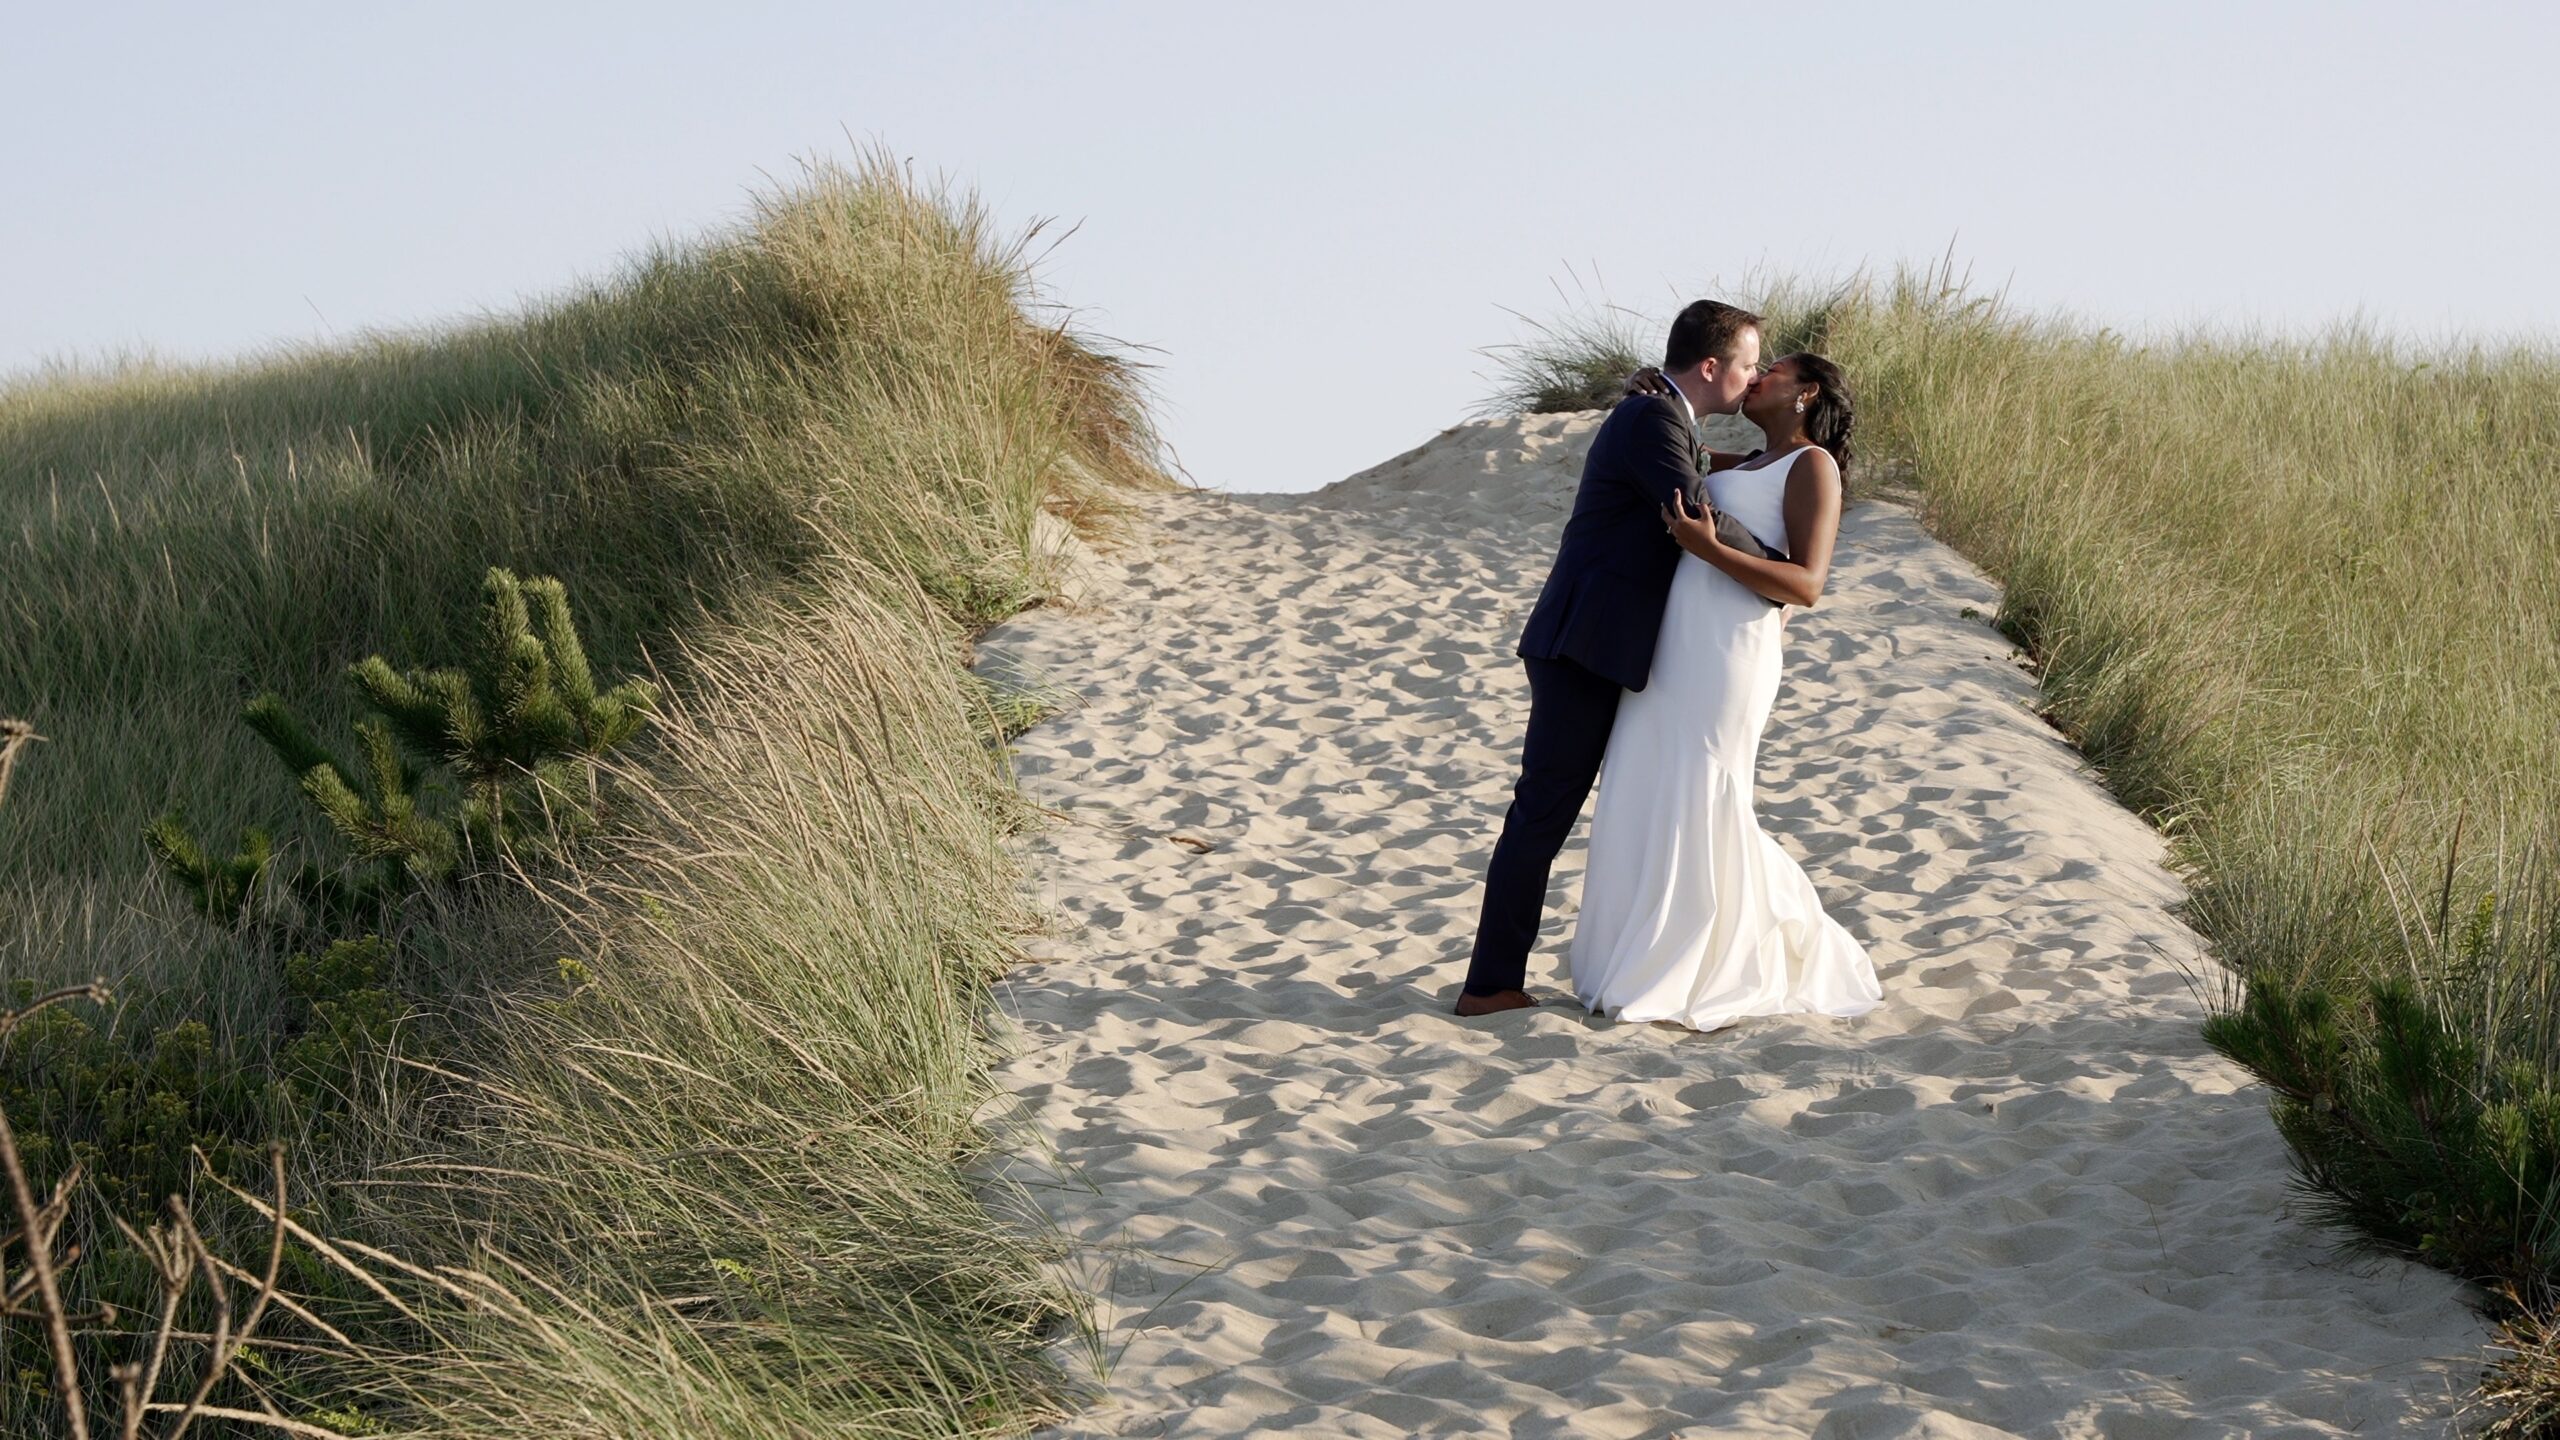 Newly married couple kissing on the sandy dunes in Martha's Vineyard